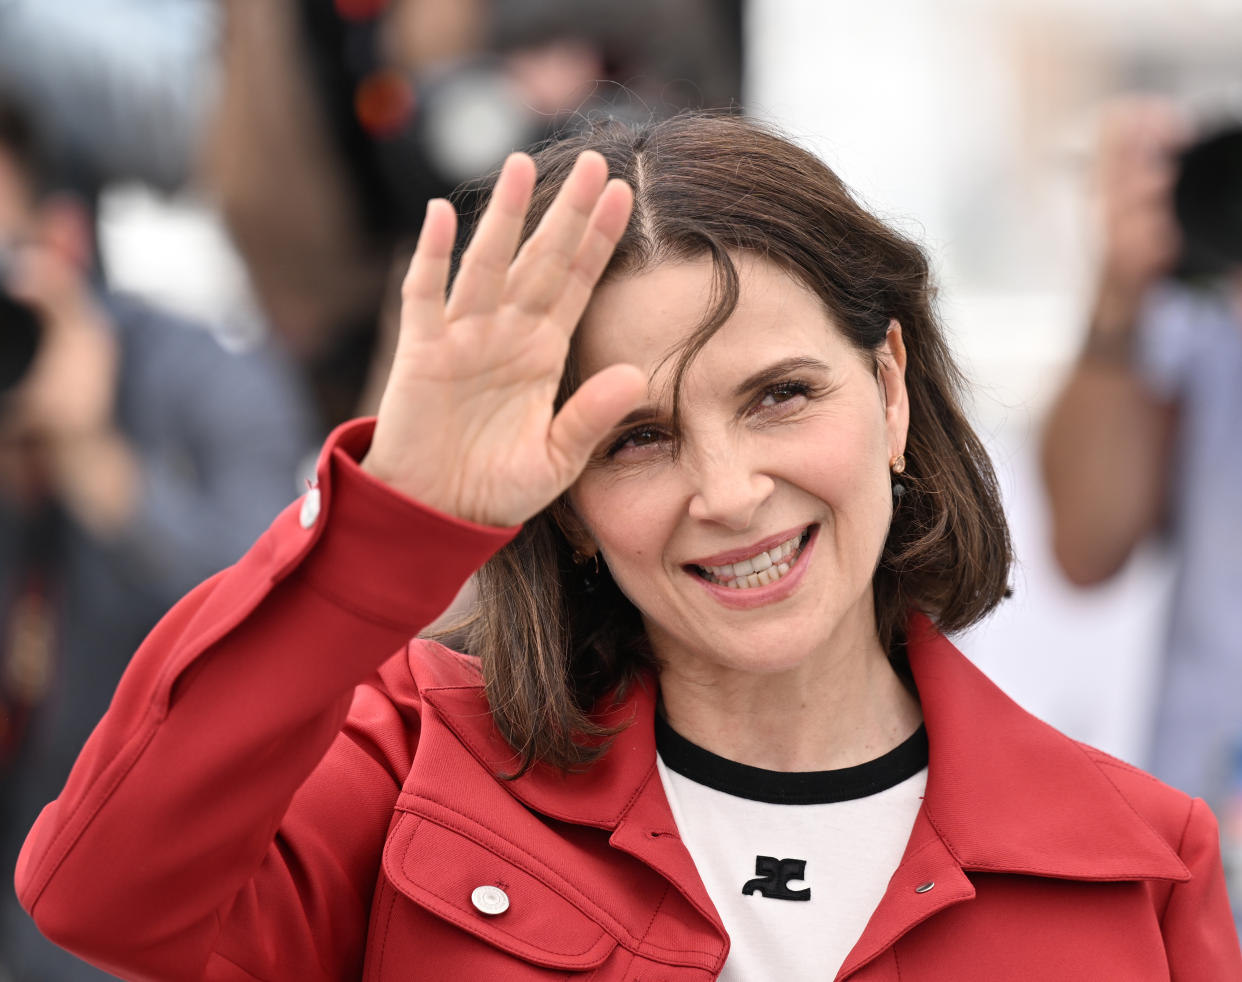 CANNES, FRANCE - MAY 25: French actress Juliette Binoche poses during a photocall for the film La Passion de Dodin Bouffant (The Pot-au-Feu) at the 76th Cannes Film Festival at Palais des Festivals in Cannes, France on May 25, 2023. (Photo by Mustafa Yalcin/Anadolu Agency via Getty Images)